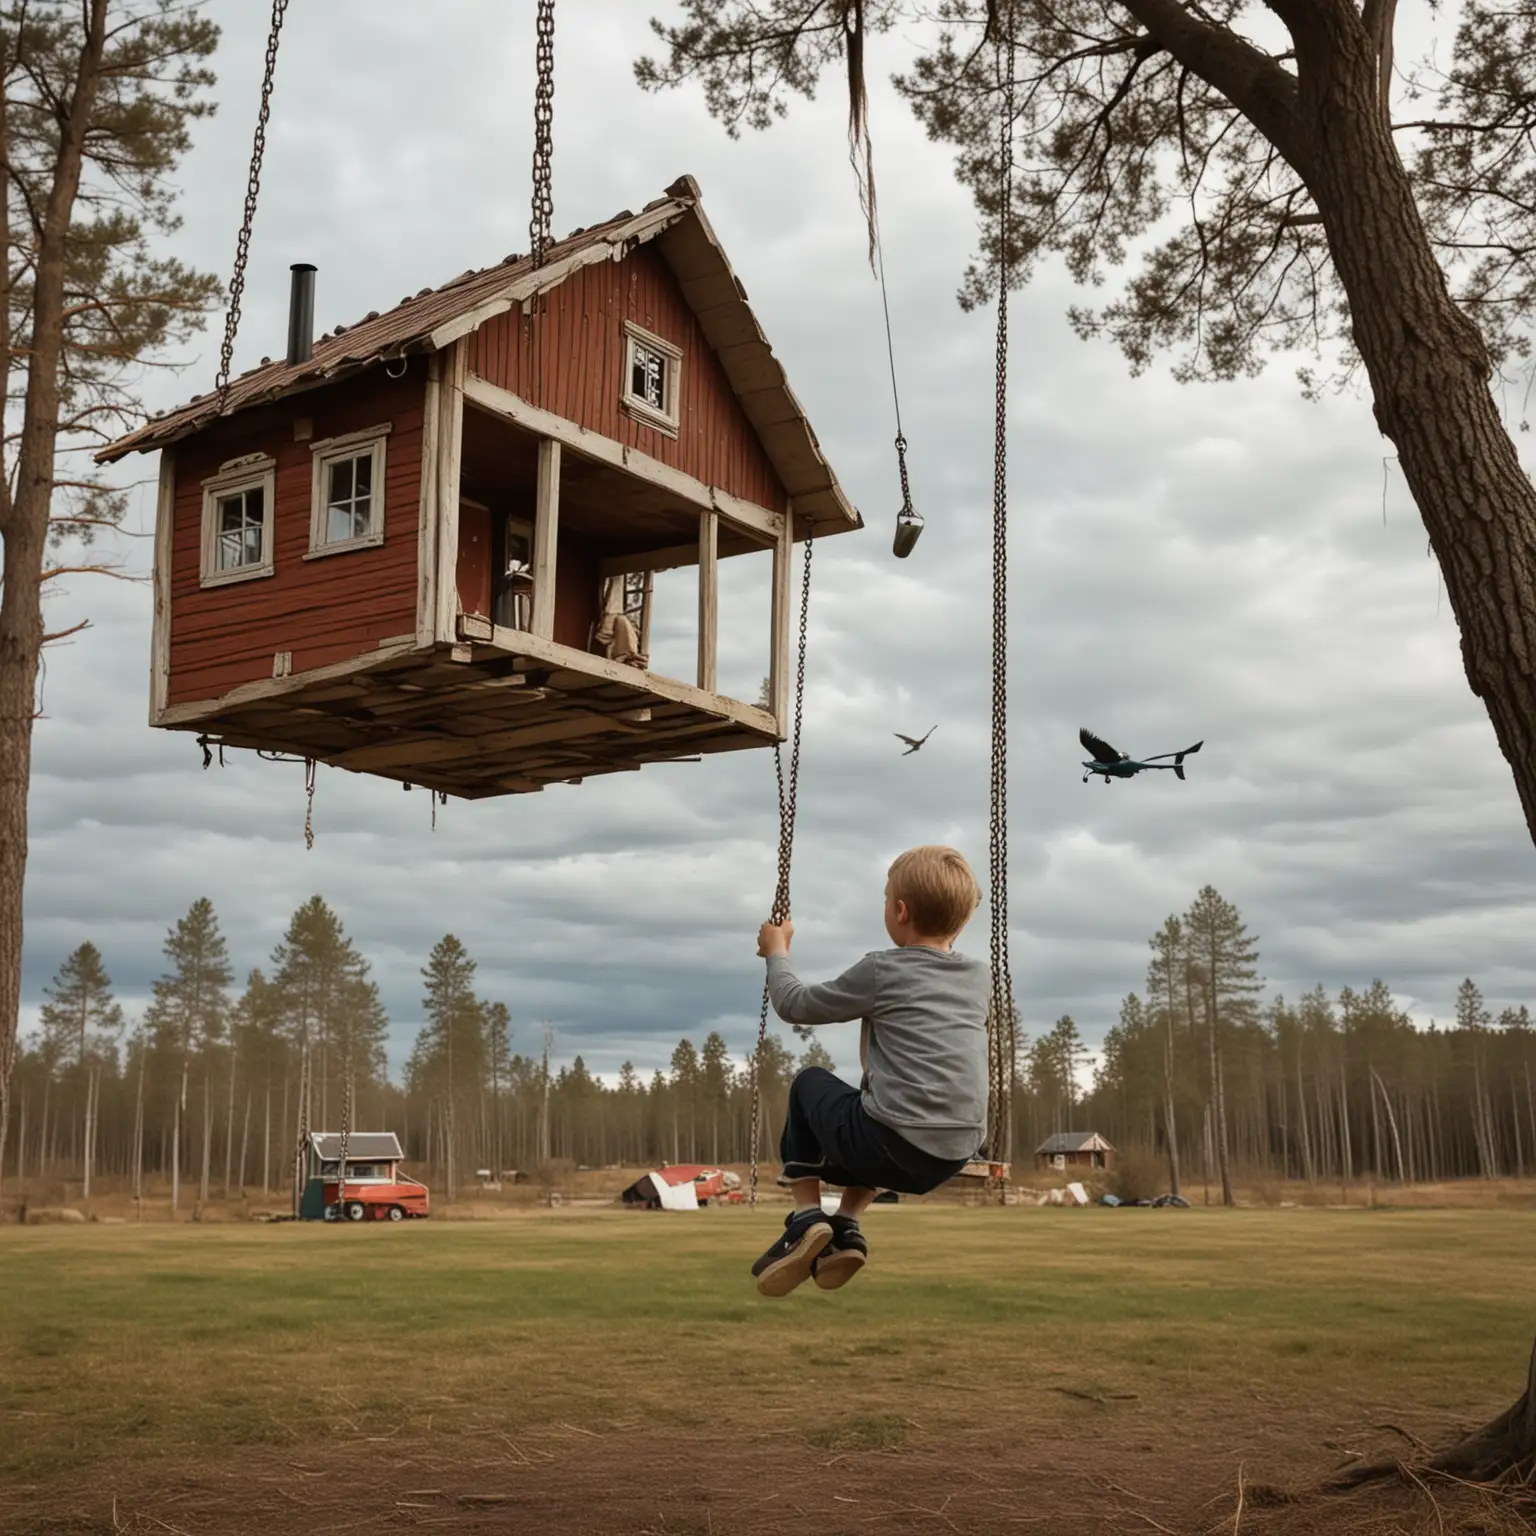 Swedish youth boy in a swing with a scary flying house in the background